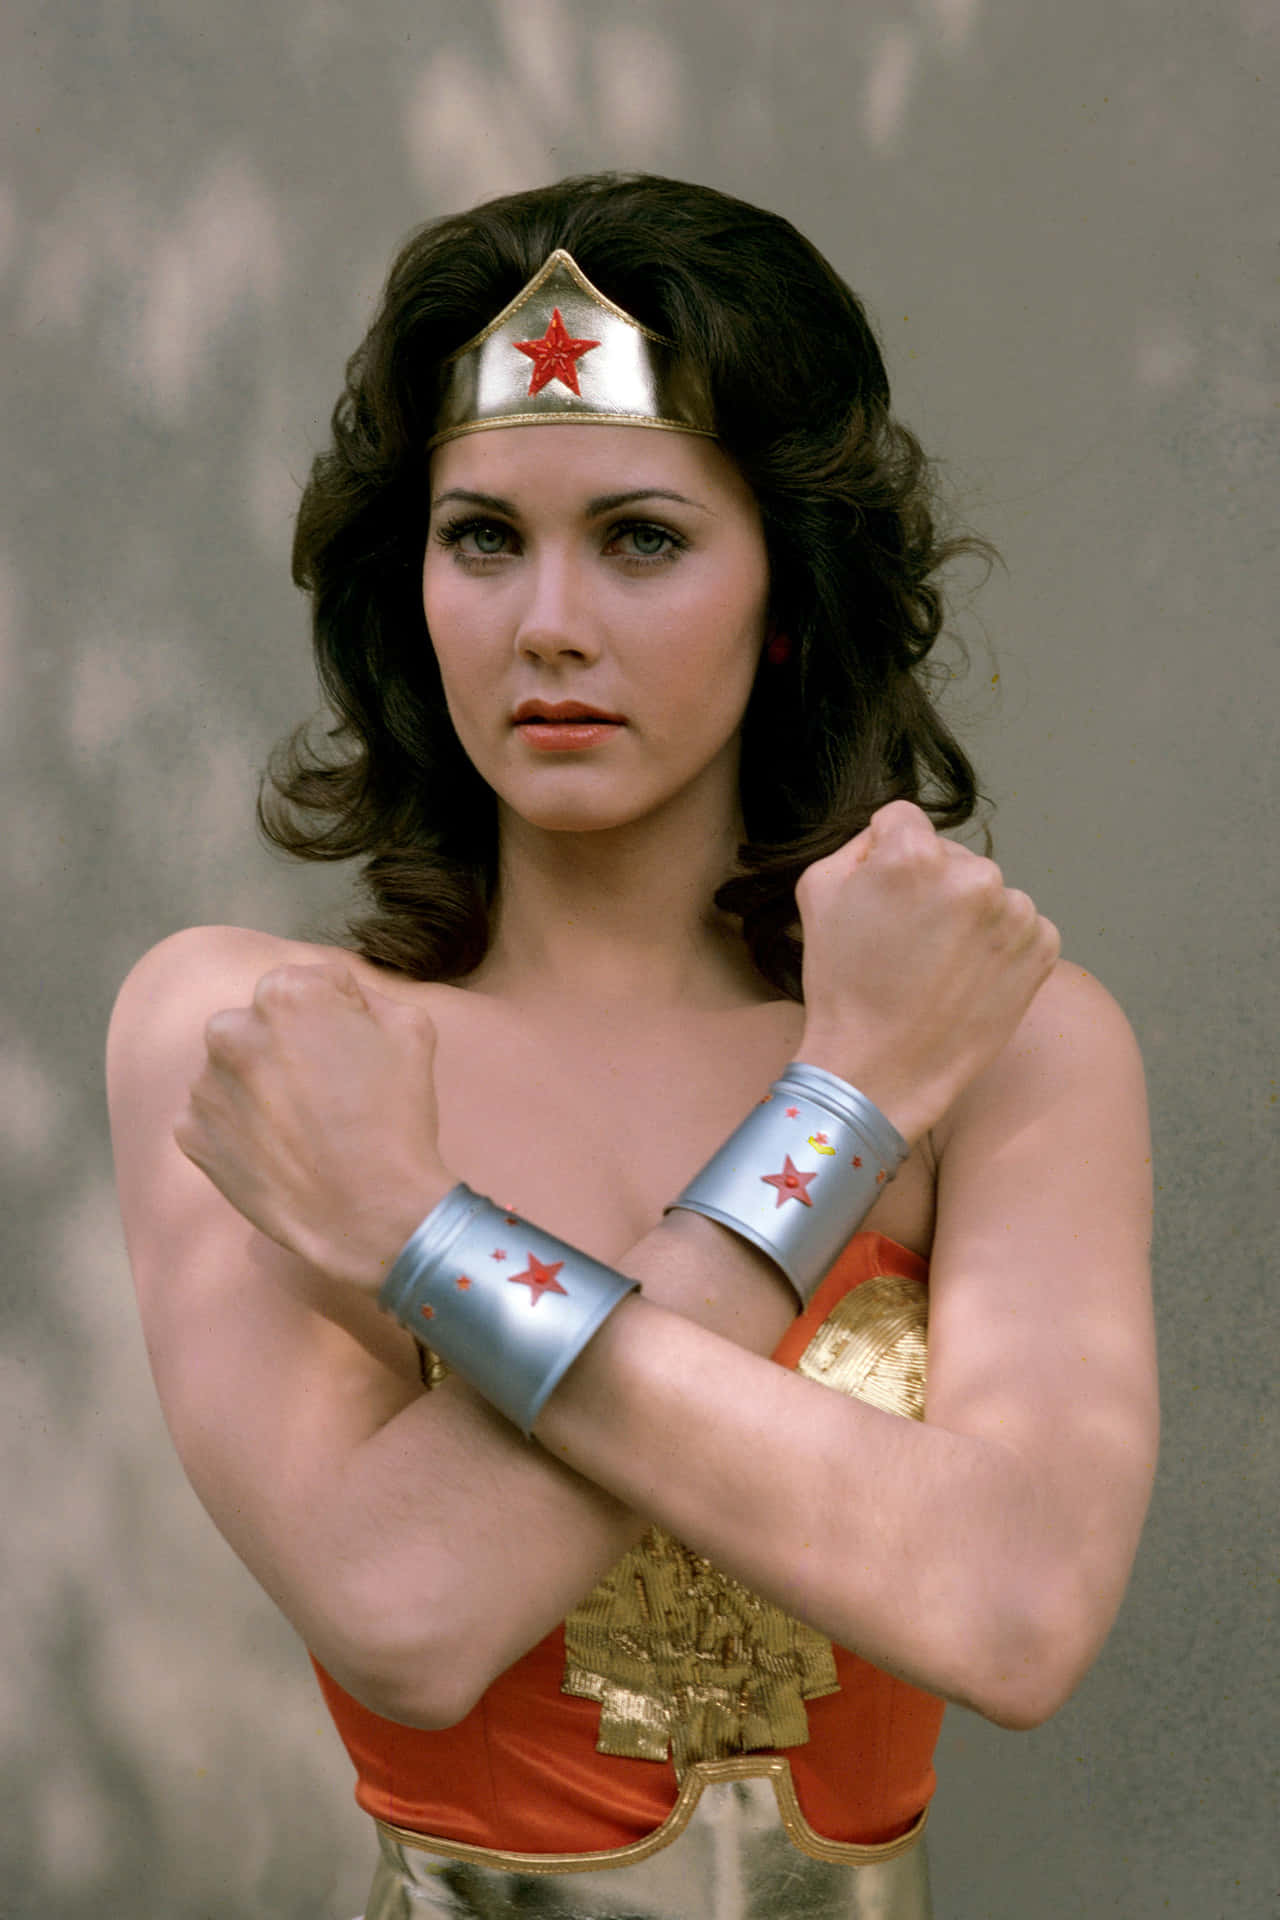 Wonder Woman: A Woman of Strength and Justice